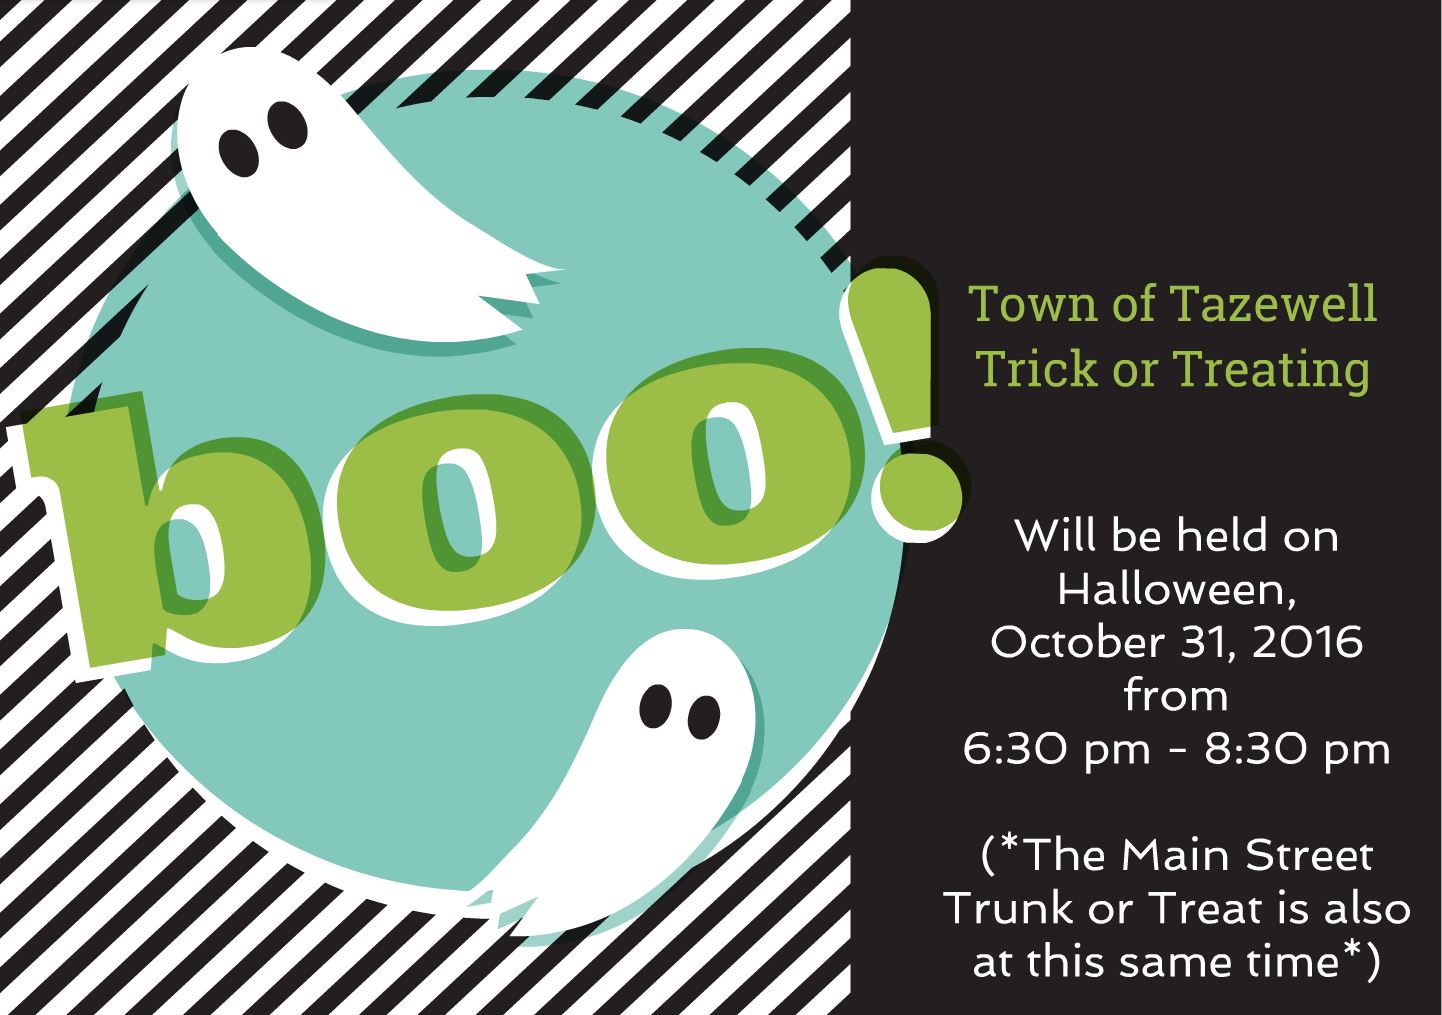 Trick-or-Treat Hours for 2016